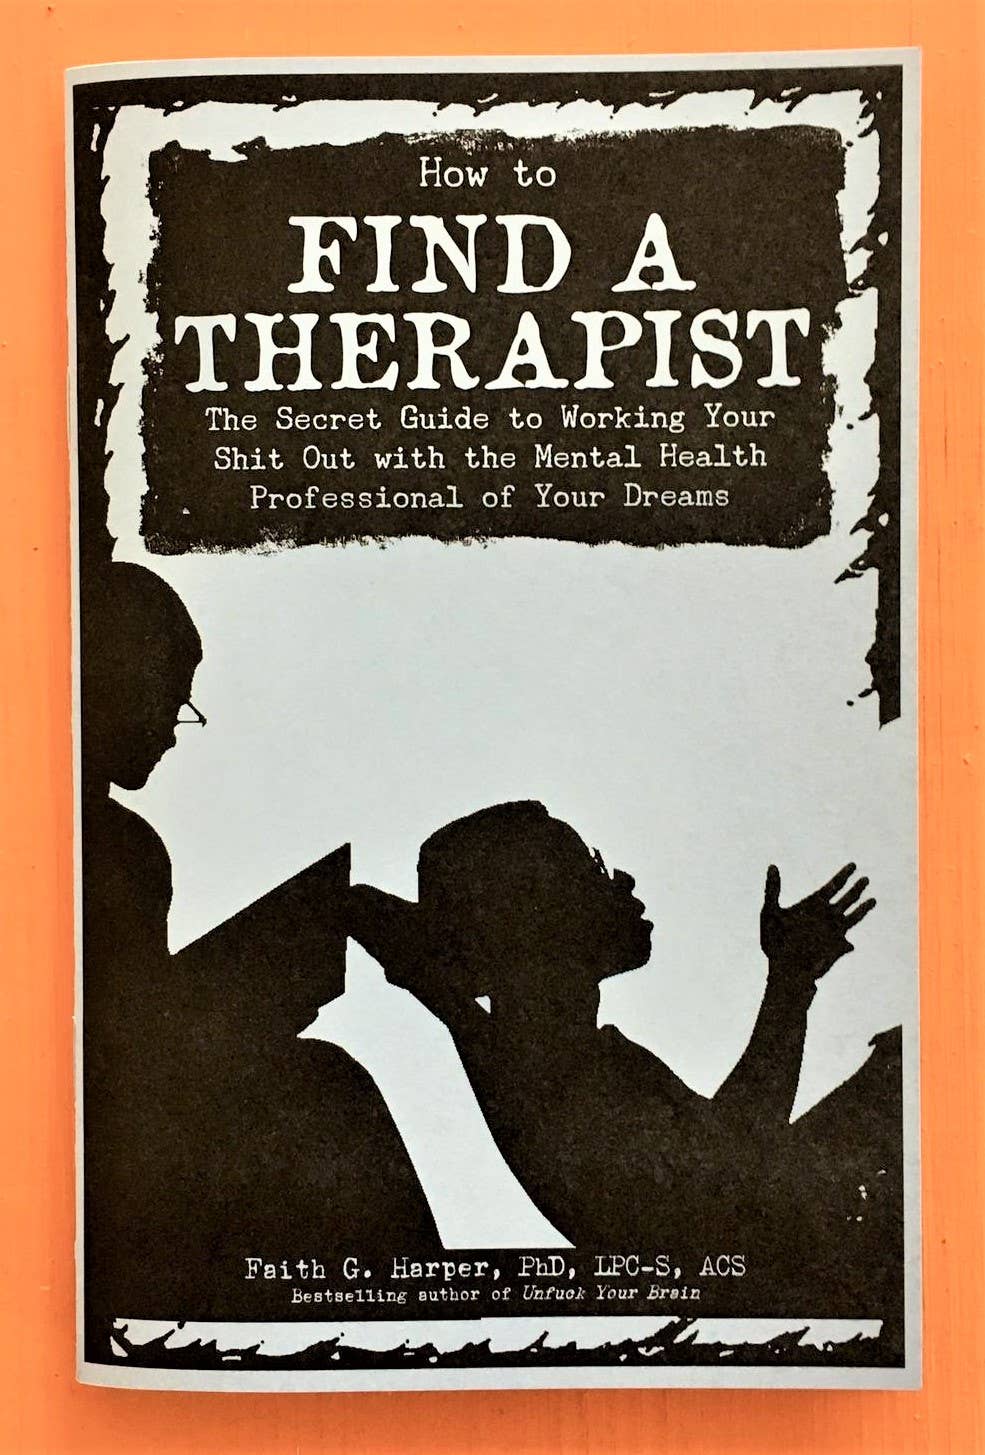 How to Find a Therapist Zine